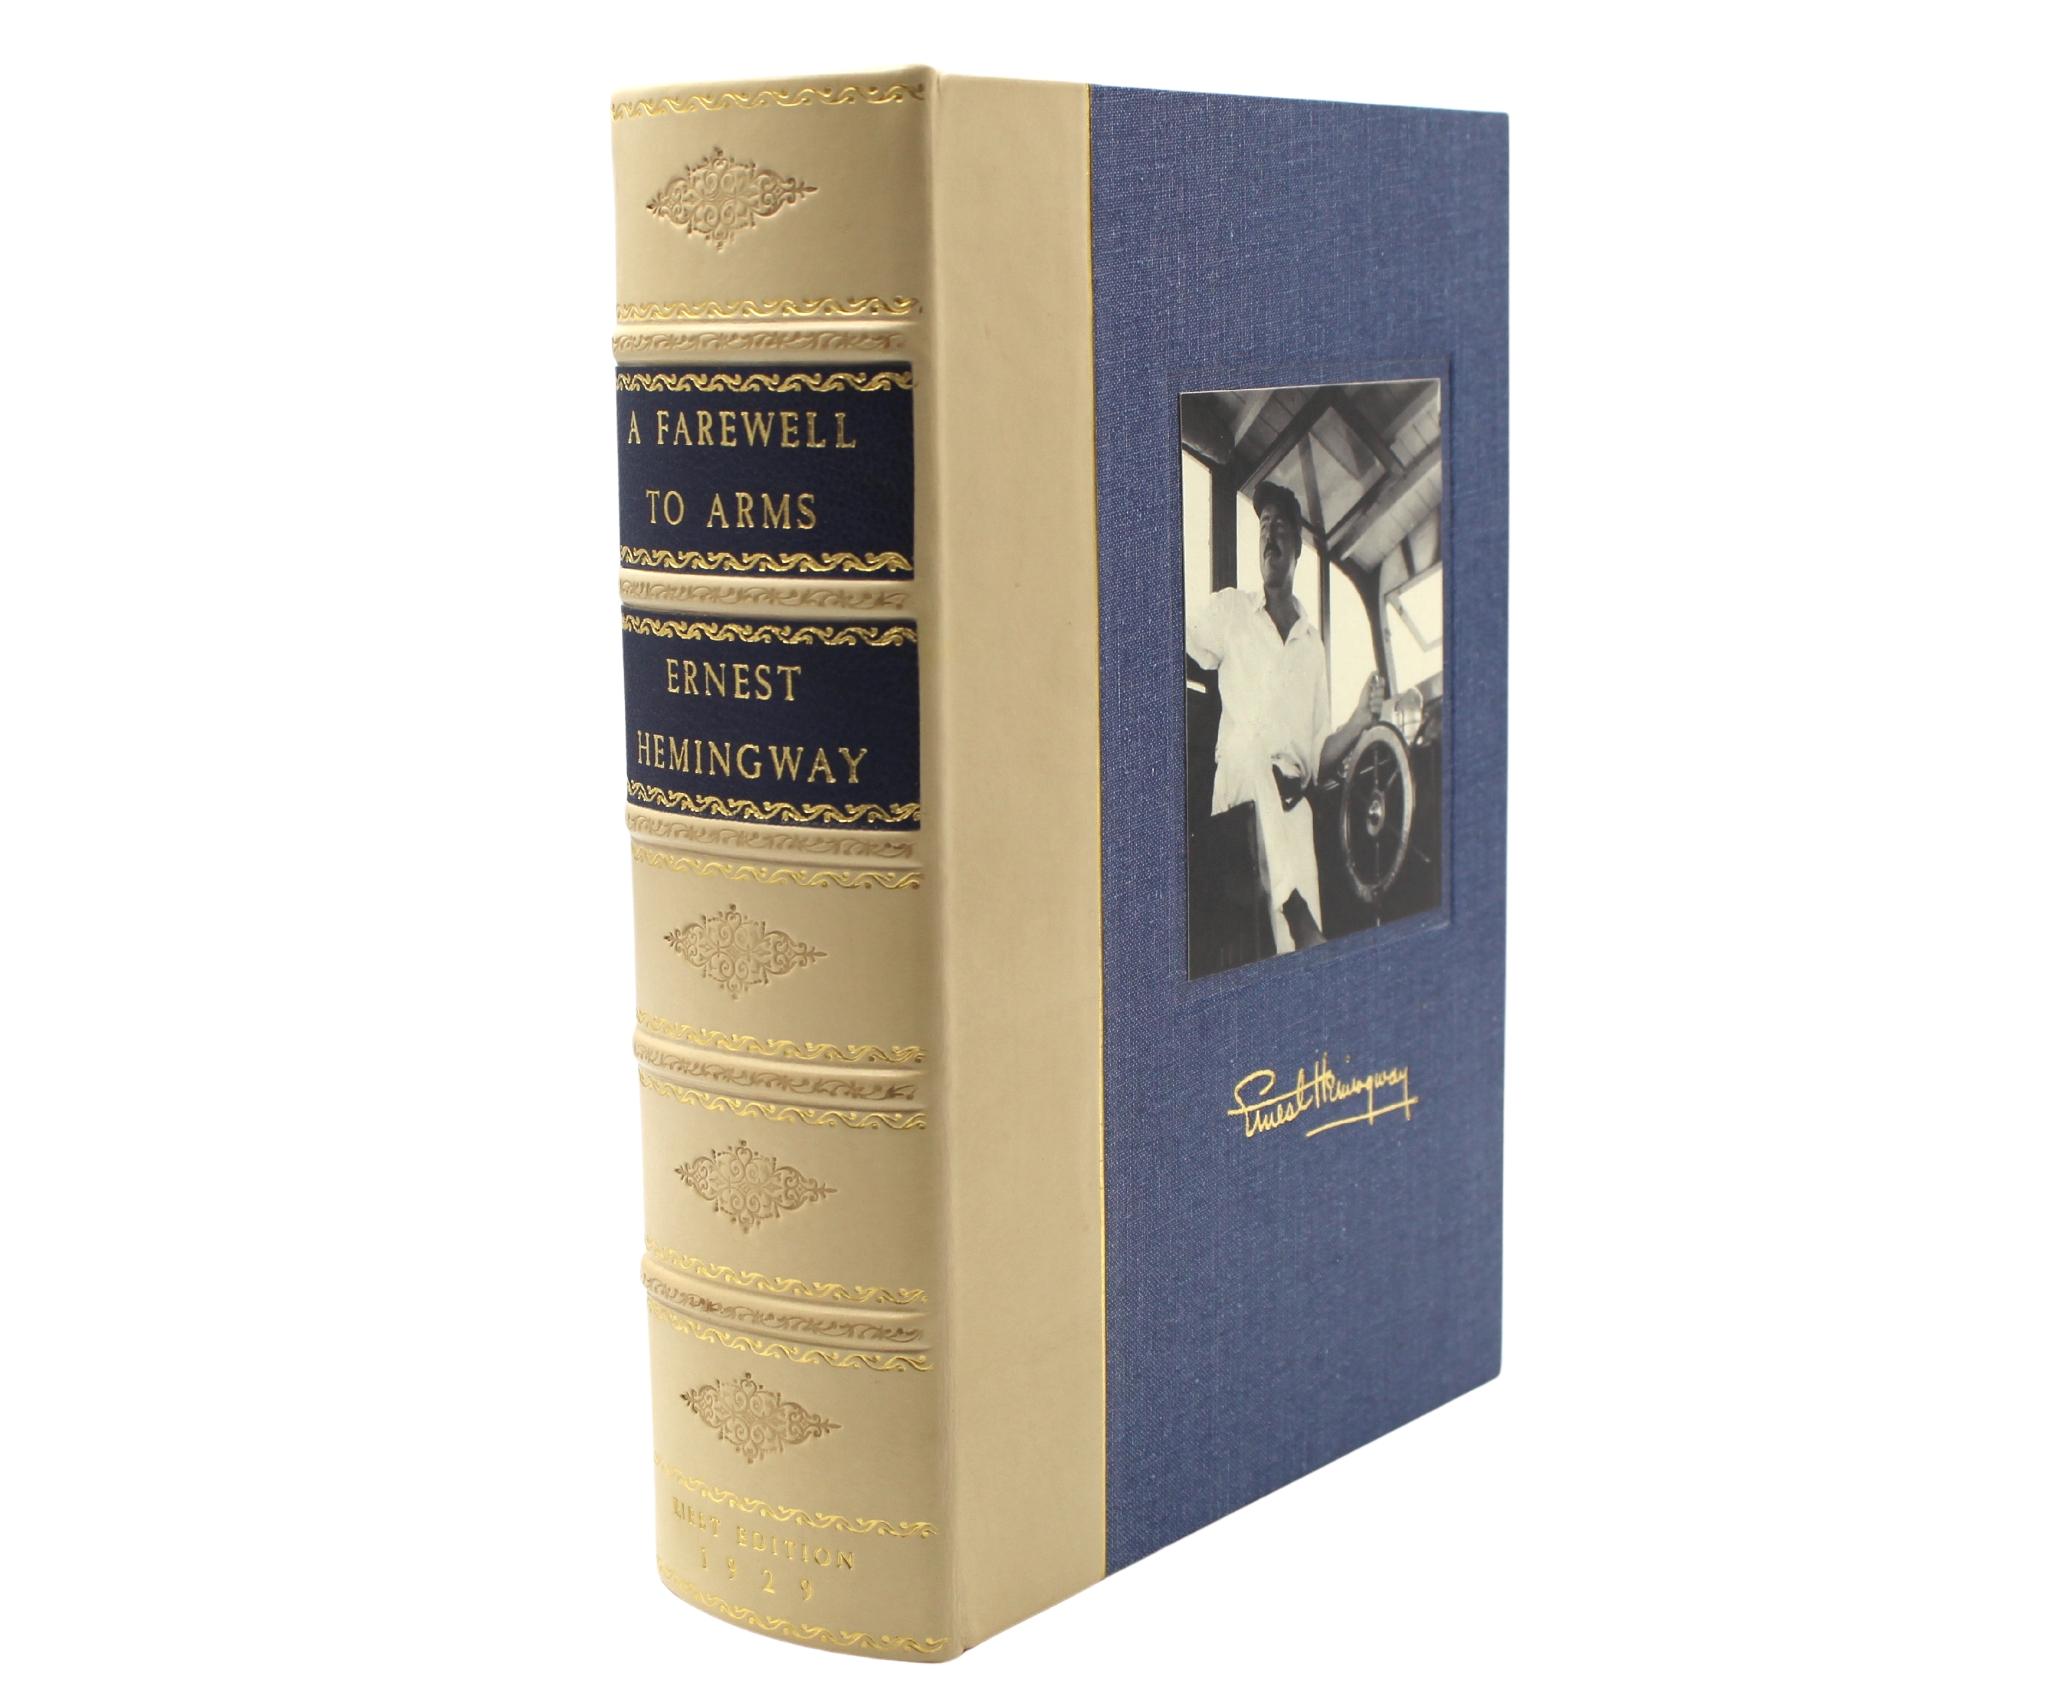 Hemingway, Ernest. A Farewell to Arms. New York: Charles Scribner's Sons, 1929. First trade edition, first issue. In the original first-state dust jacket and publisher’s black cloth boards. Presented in a new archival ¼ leather and cloth clamshell